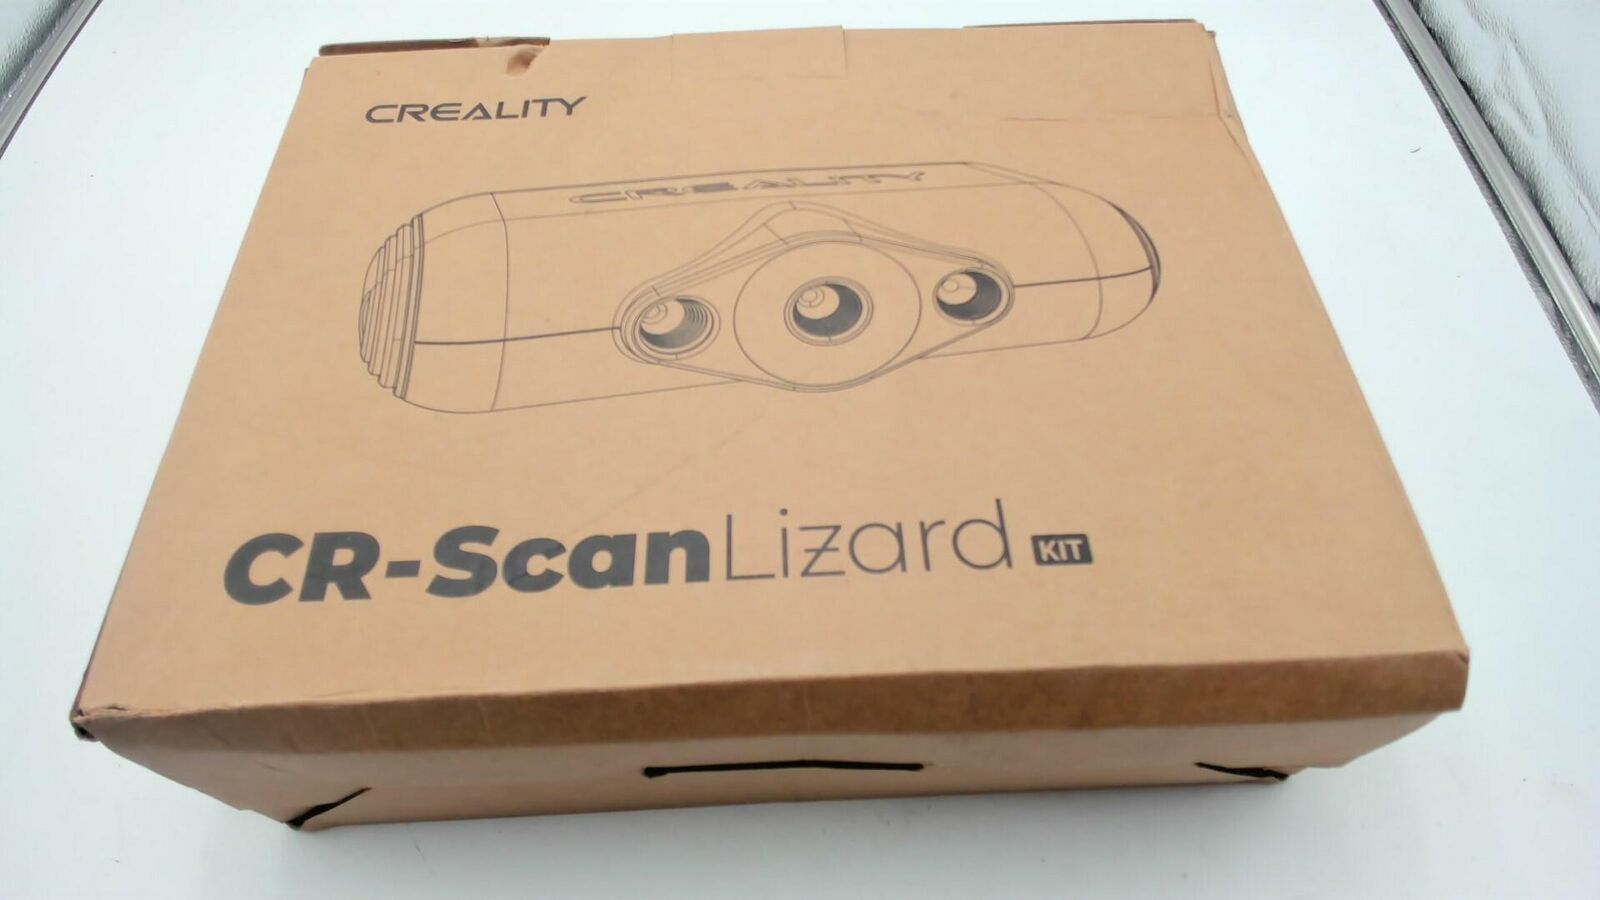 Creality 3D Scanner CR Scan Lizard for 3D Printing